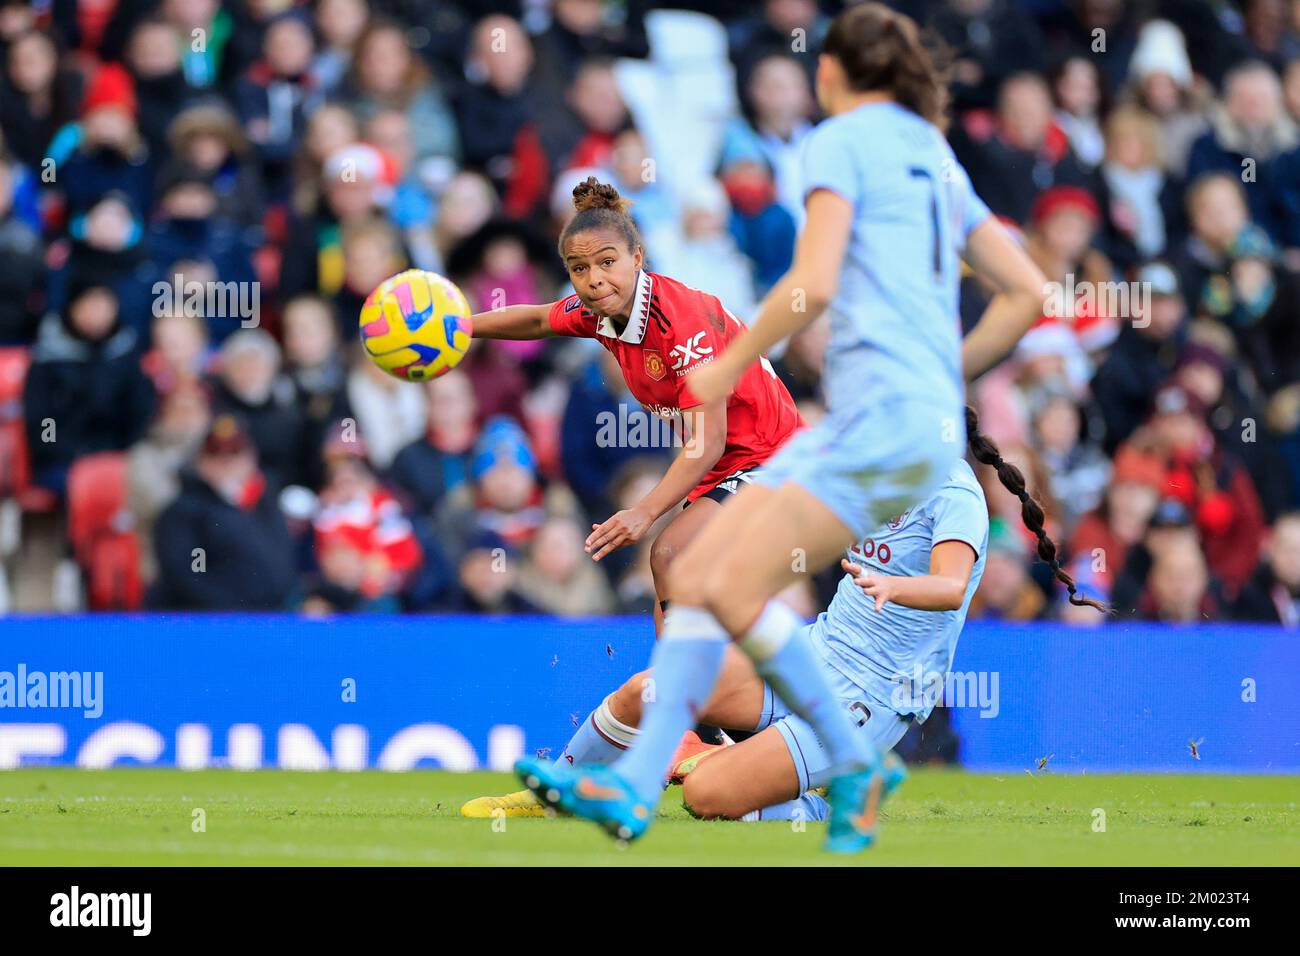 Nikita Parris #22 of Manchester United crosses with the ball during The FA Women's Super League match Manchester United Women vs Aston Villa Women at Old Trafford, Manchester, United Kingdom, 3rd December 2022  (Photo by Conor Molloy/News Images) Stock Photo